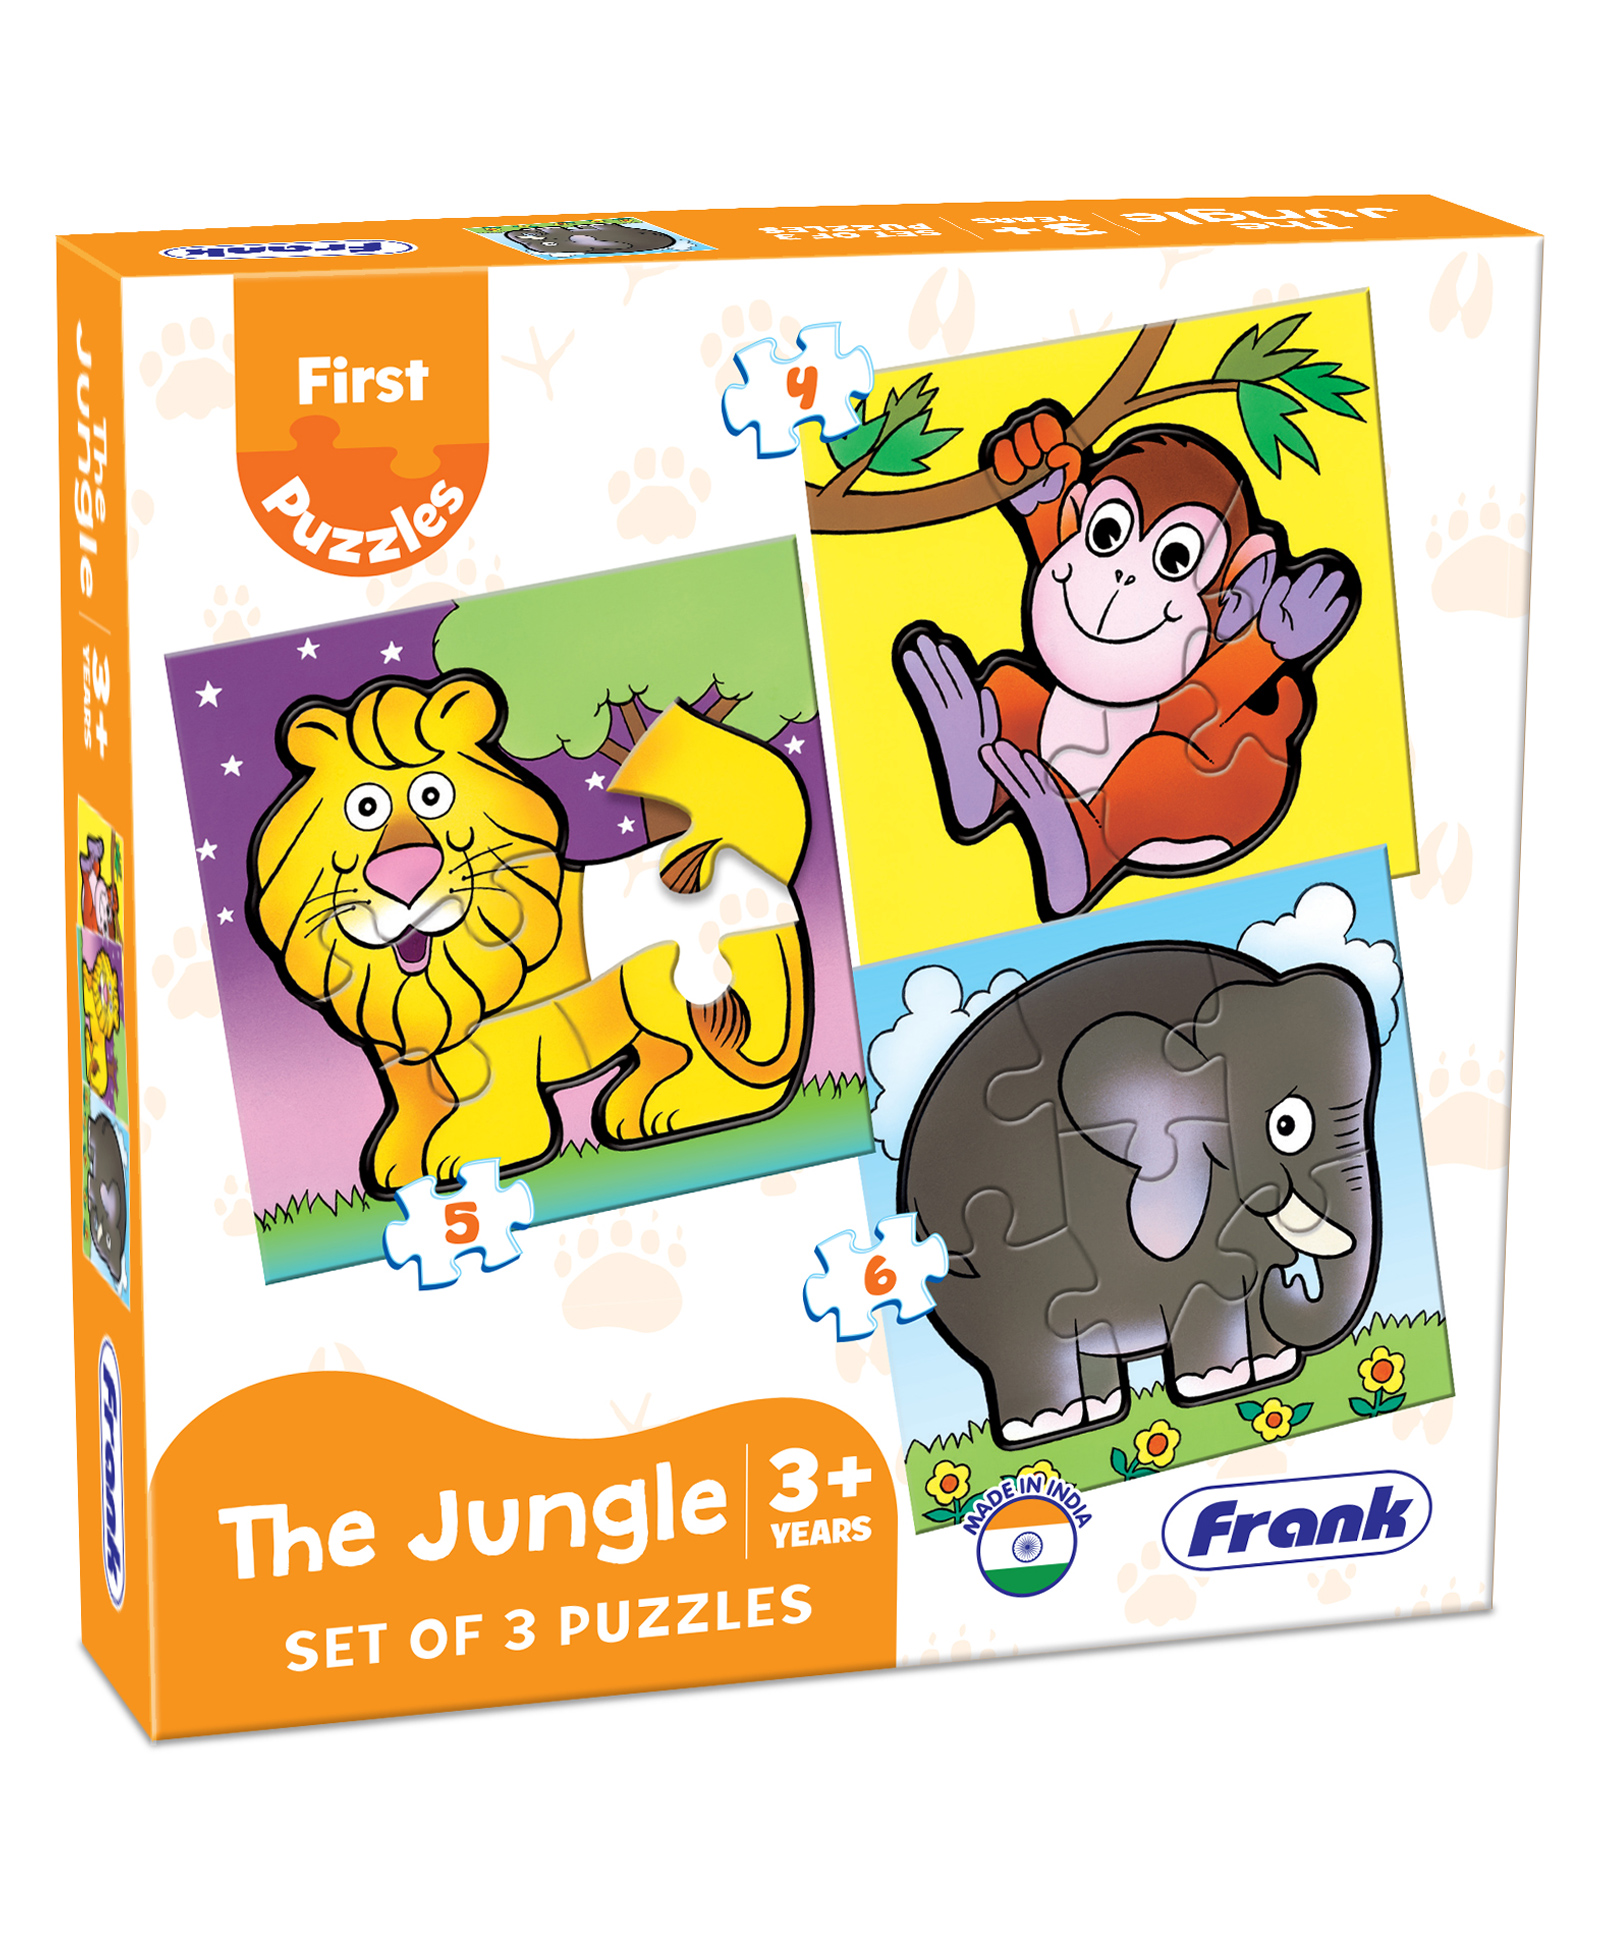 Frank Play And Learn The Jungle Jigsaw Puzzle Multicolour Set of 3 - 15  Pieces Online India, Buy Puzzle Games & Toys for (3-6 Years) at   - 2833600